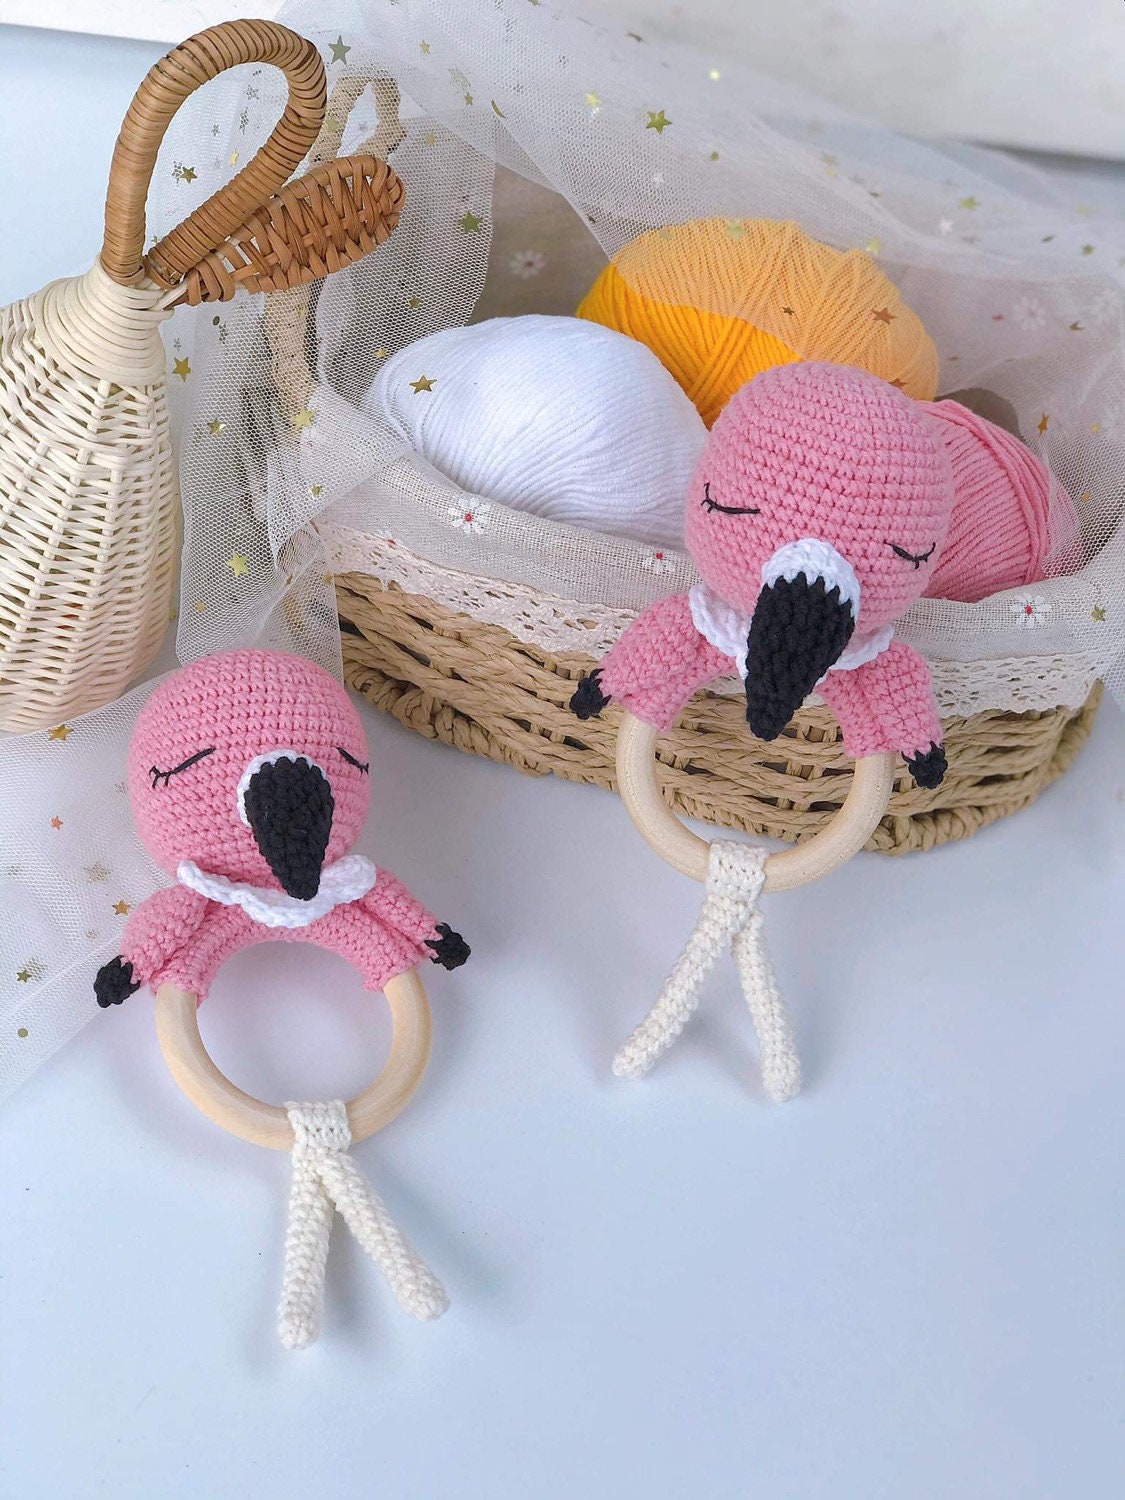 Rio Handmade Personalized Baby Gift, Flamingo Newborn Baby Rattle, Baby Crochet Rattle Gift, Toy Rattle With Name